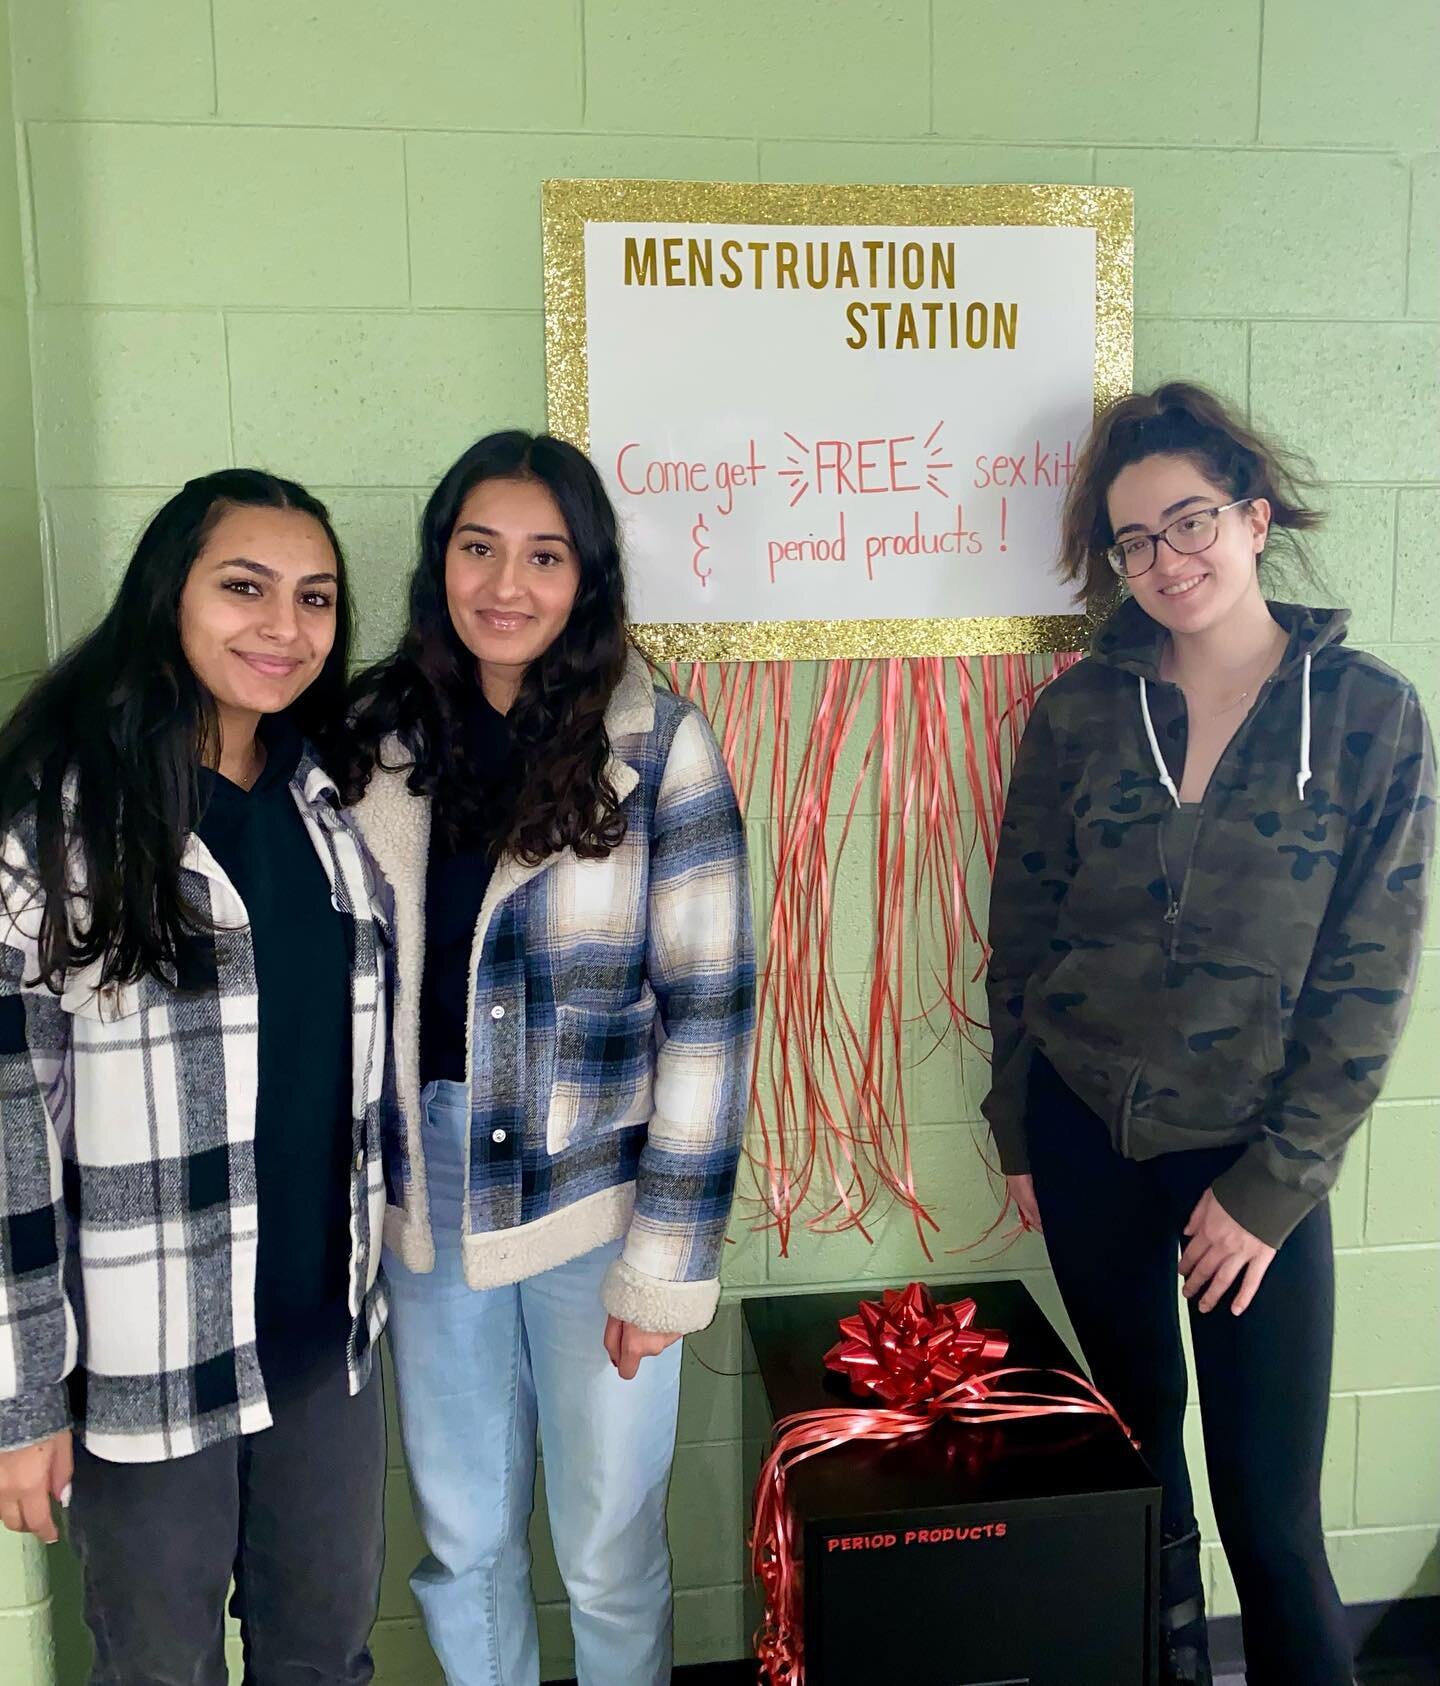 Another menstruation/sexual health station added ☑️ This time in the campus gym, right next to the first floor bathrooms and women&rsquo;s section 💪🏼 Shoutout to public health students, Aina and Jenna, for planning and creating the second station o